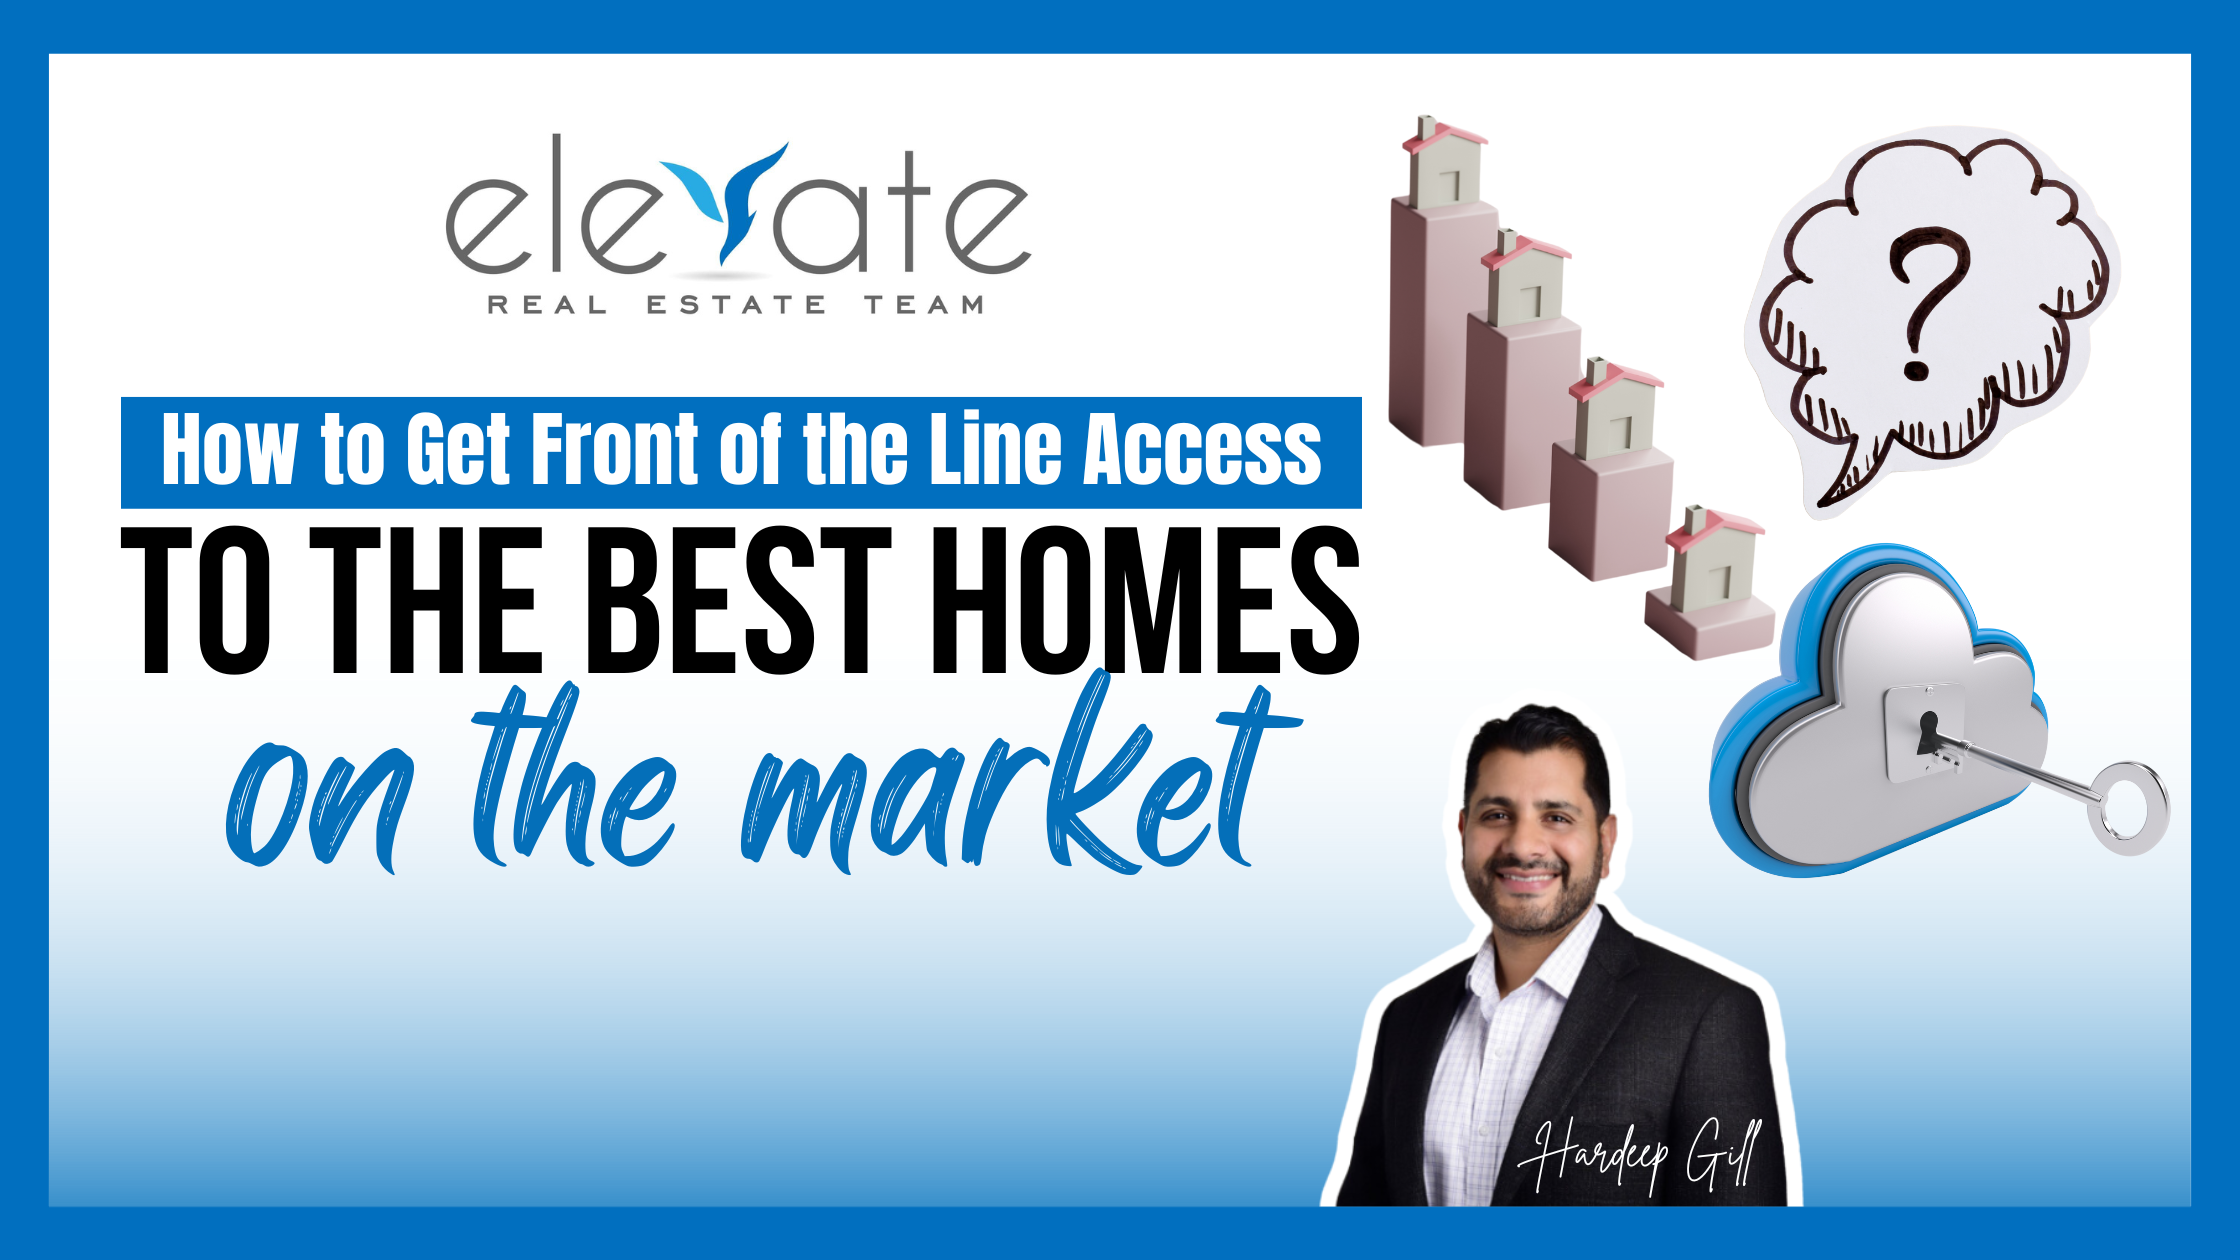 How to Get Front of the Line Access to the Best Homes on the Market